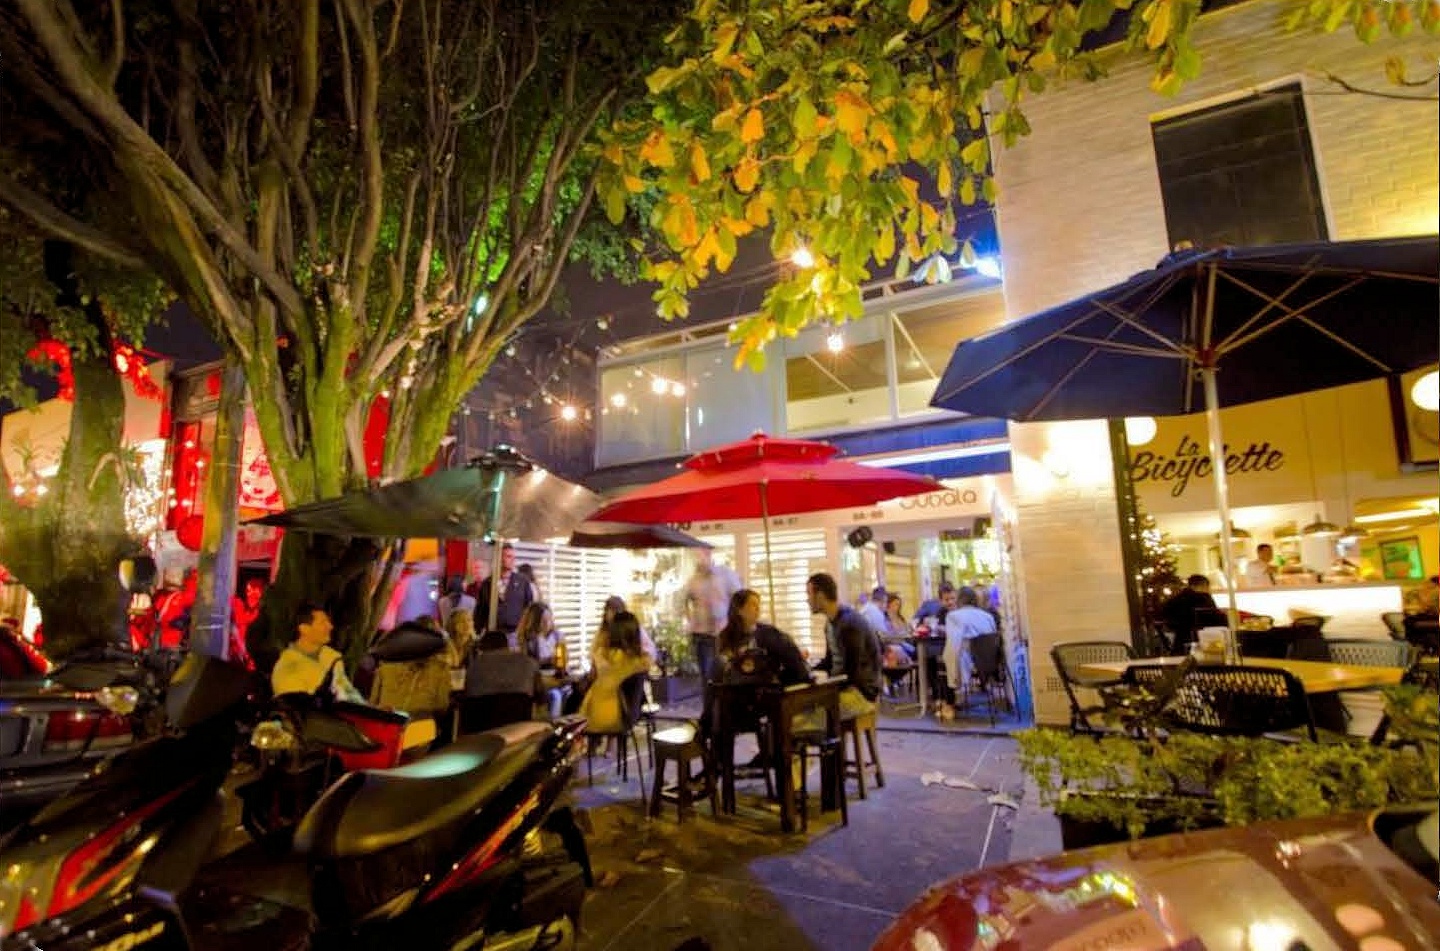 Casa Provenza sits in the heart of Medellin's restaurant and nightlife district 